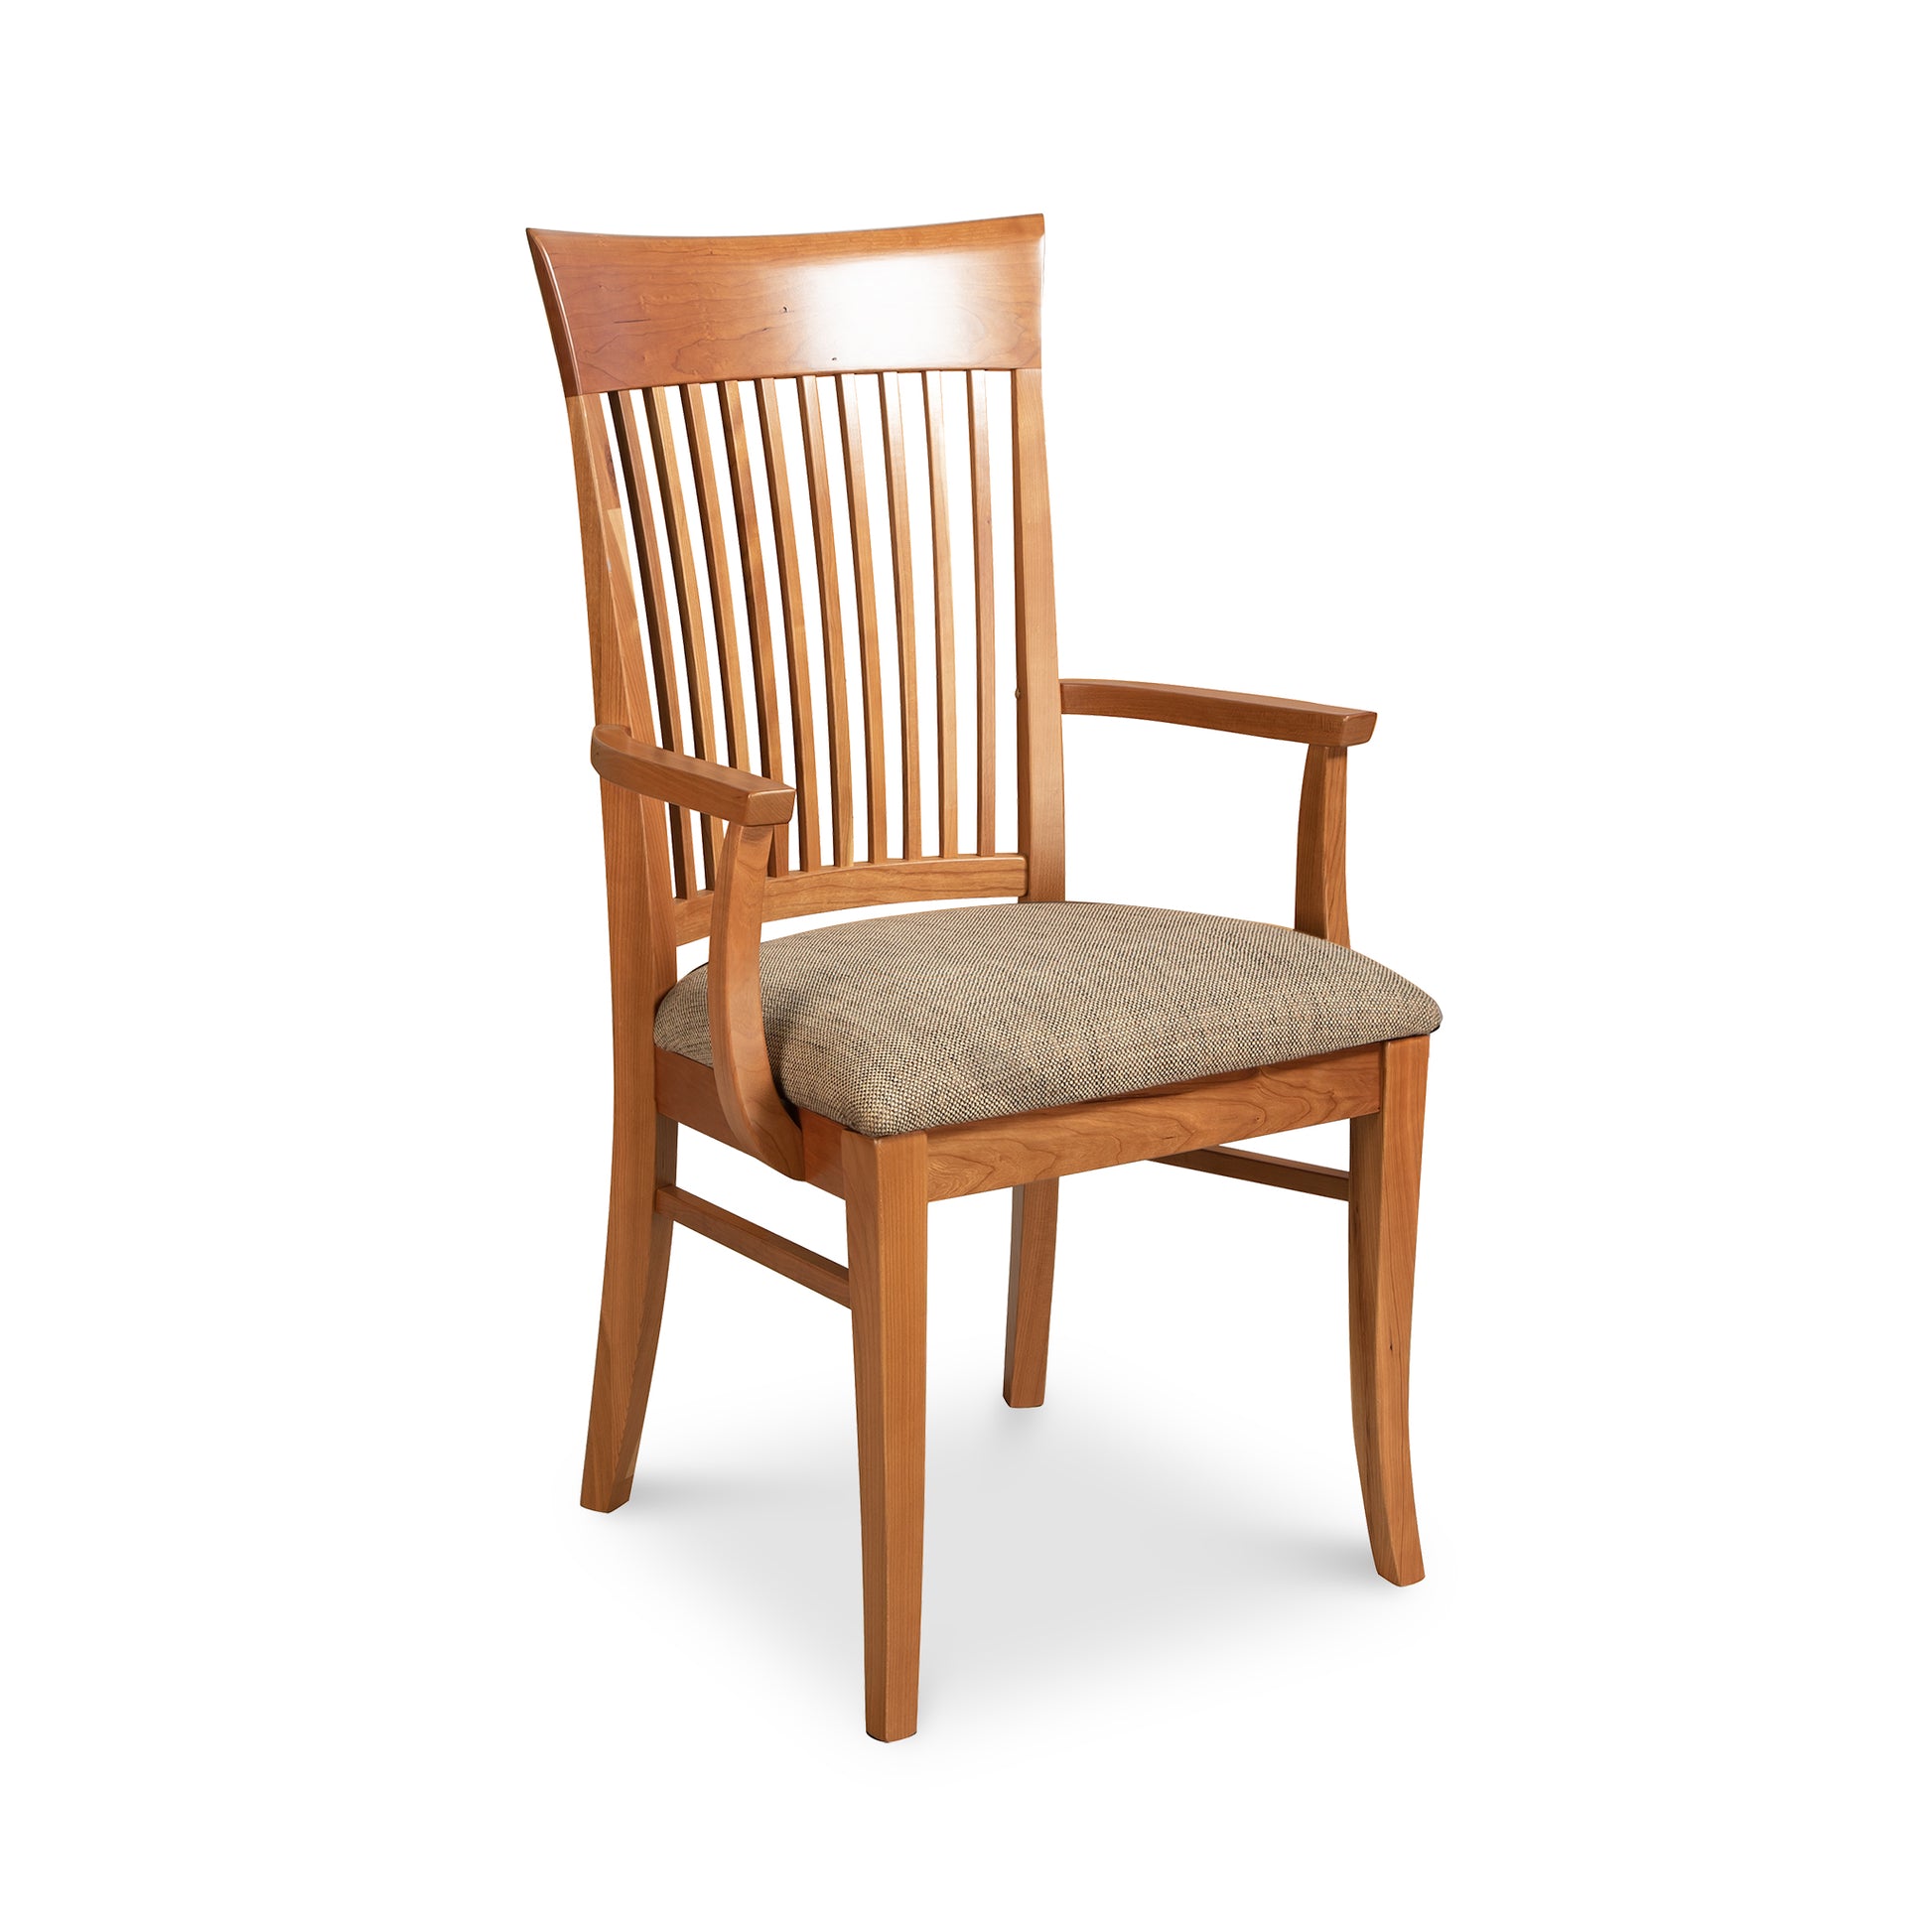 A Contemporary Shaker Chair with armrests, featuring vertical slats on the back and a cushioned seat with a beige fabric cover, crafted from natural cherry wood, isolated on a white background by Vermont Woods Studios.